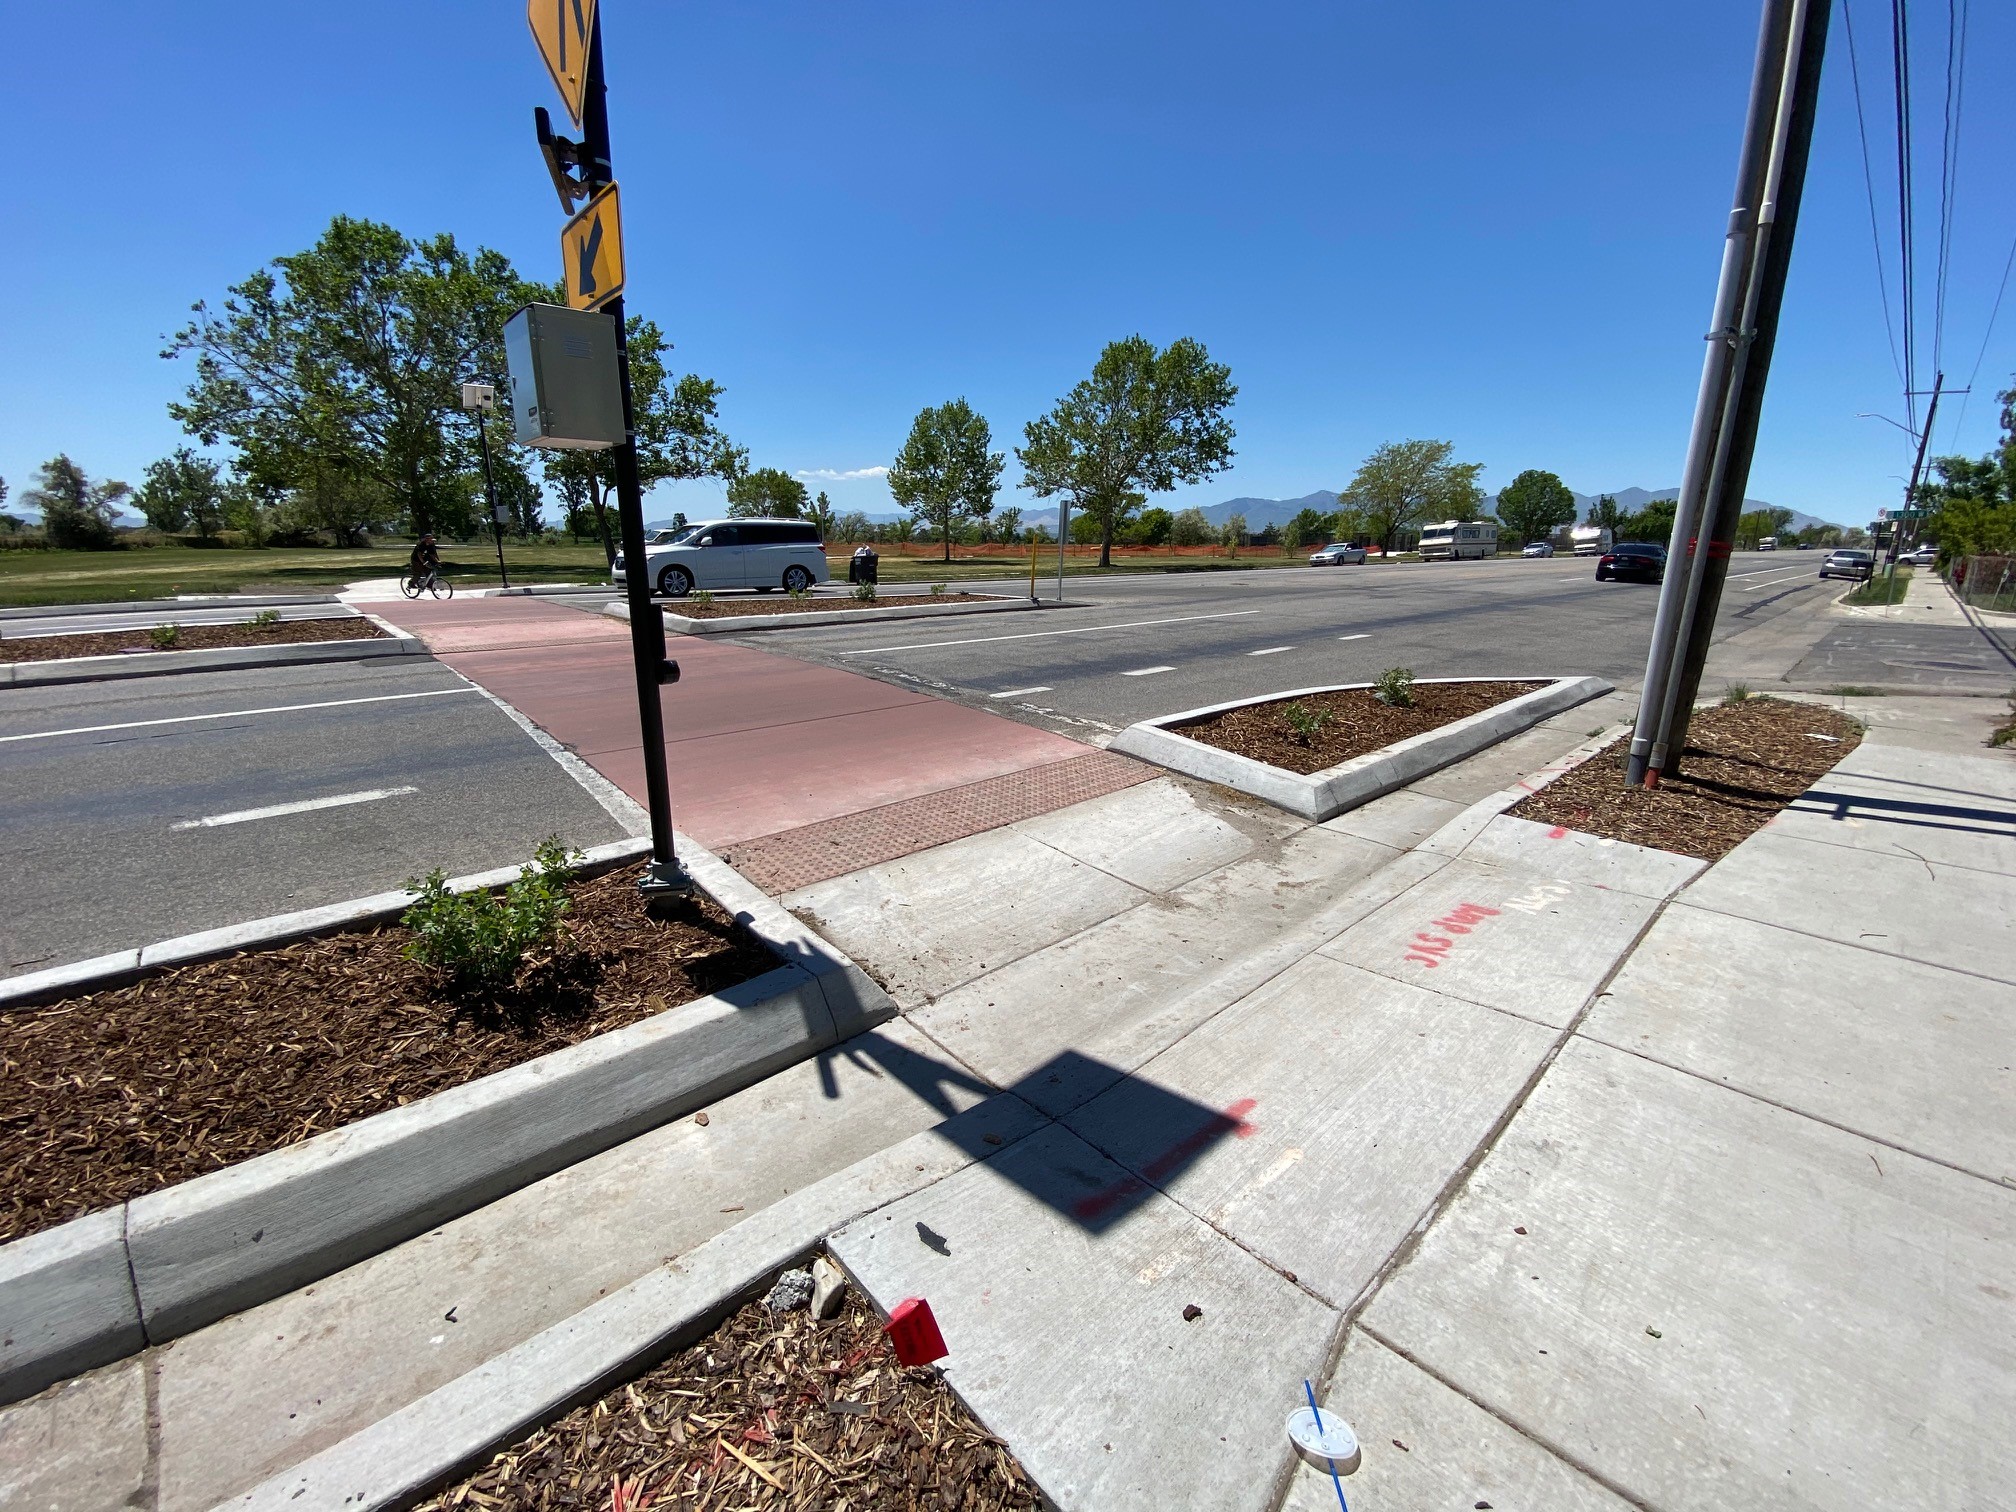 A crosswalk improvement at 1300 West and 1700 South. The crosswalk was upgraded to red concrete to stand out against the black asphalt road. Pedestrian push buttons mounted to flashing yellow crosswalk signs are located on each side of the road. Concrete curb extensions and a pedestrian refuge island filled with mulch and shrubs shorten the crossing distance and make pedestrians more visible to drivers. 